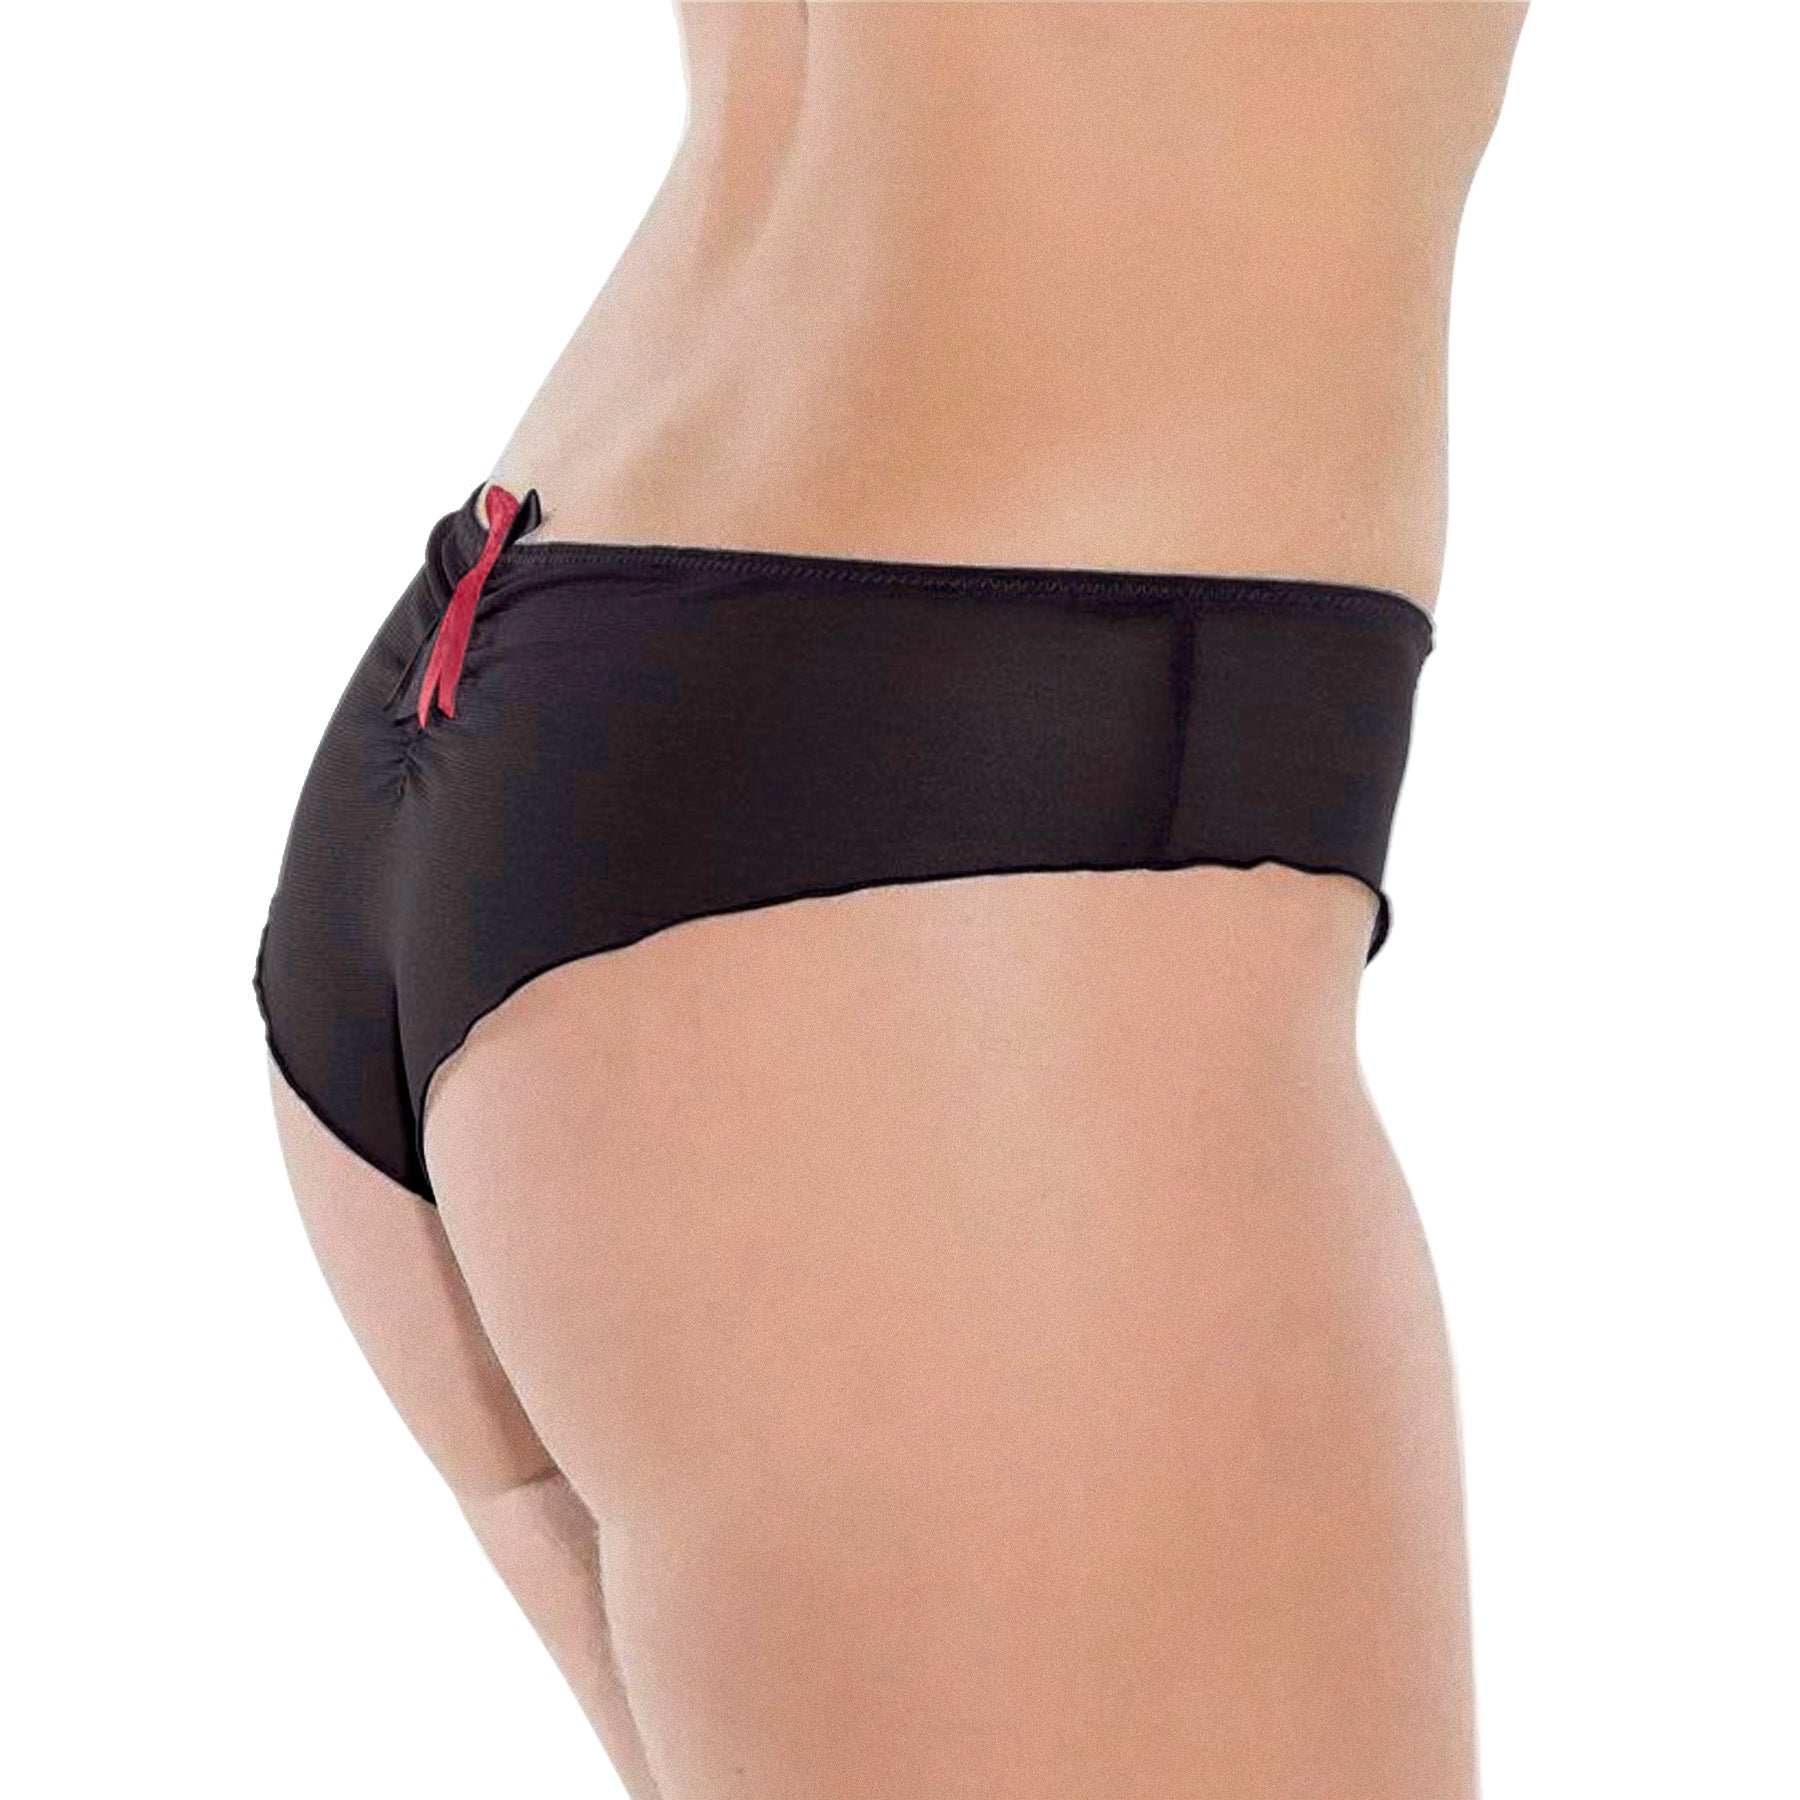 Fit Fully Yours Nicole Tanga U2275 Black Red Rear View